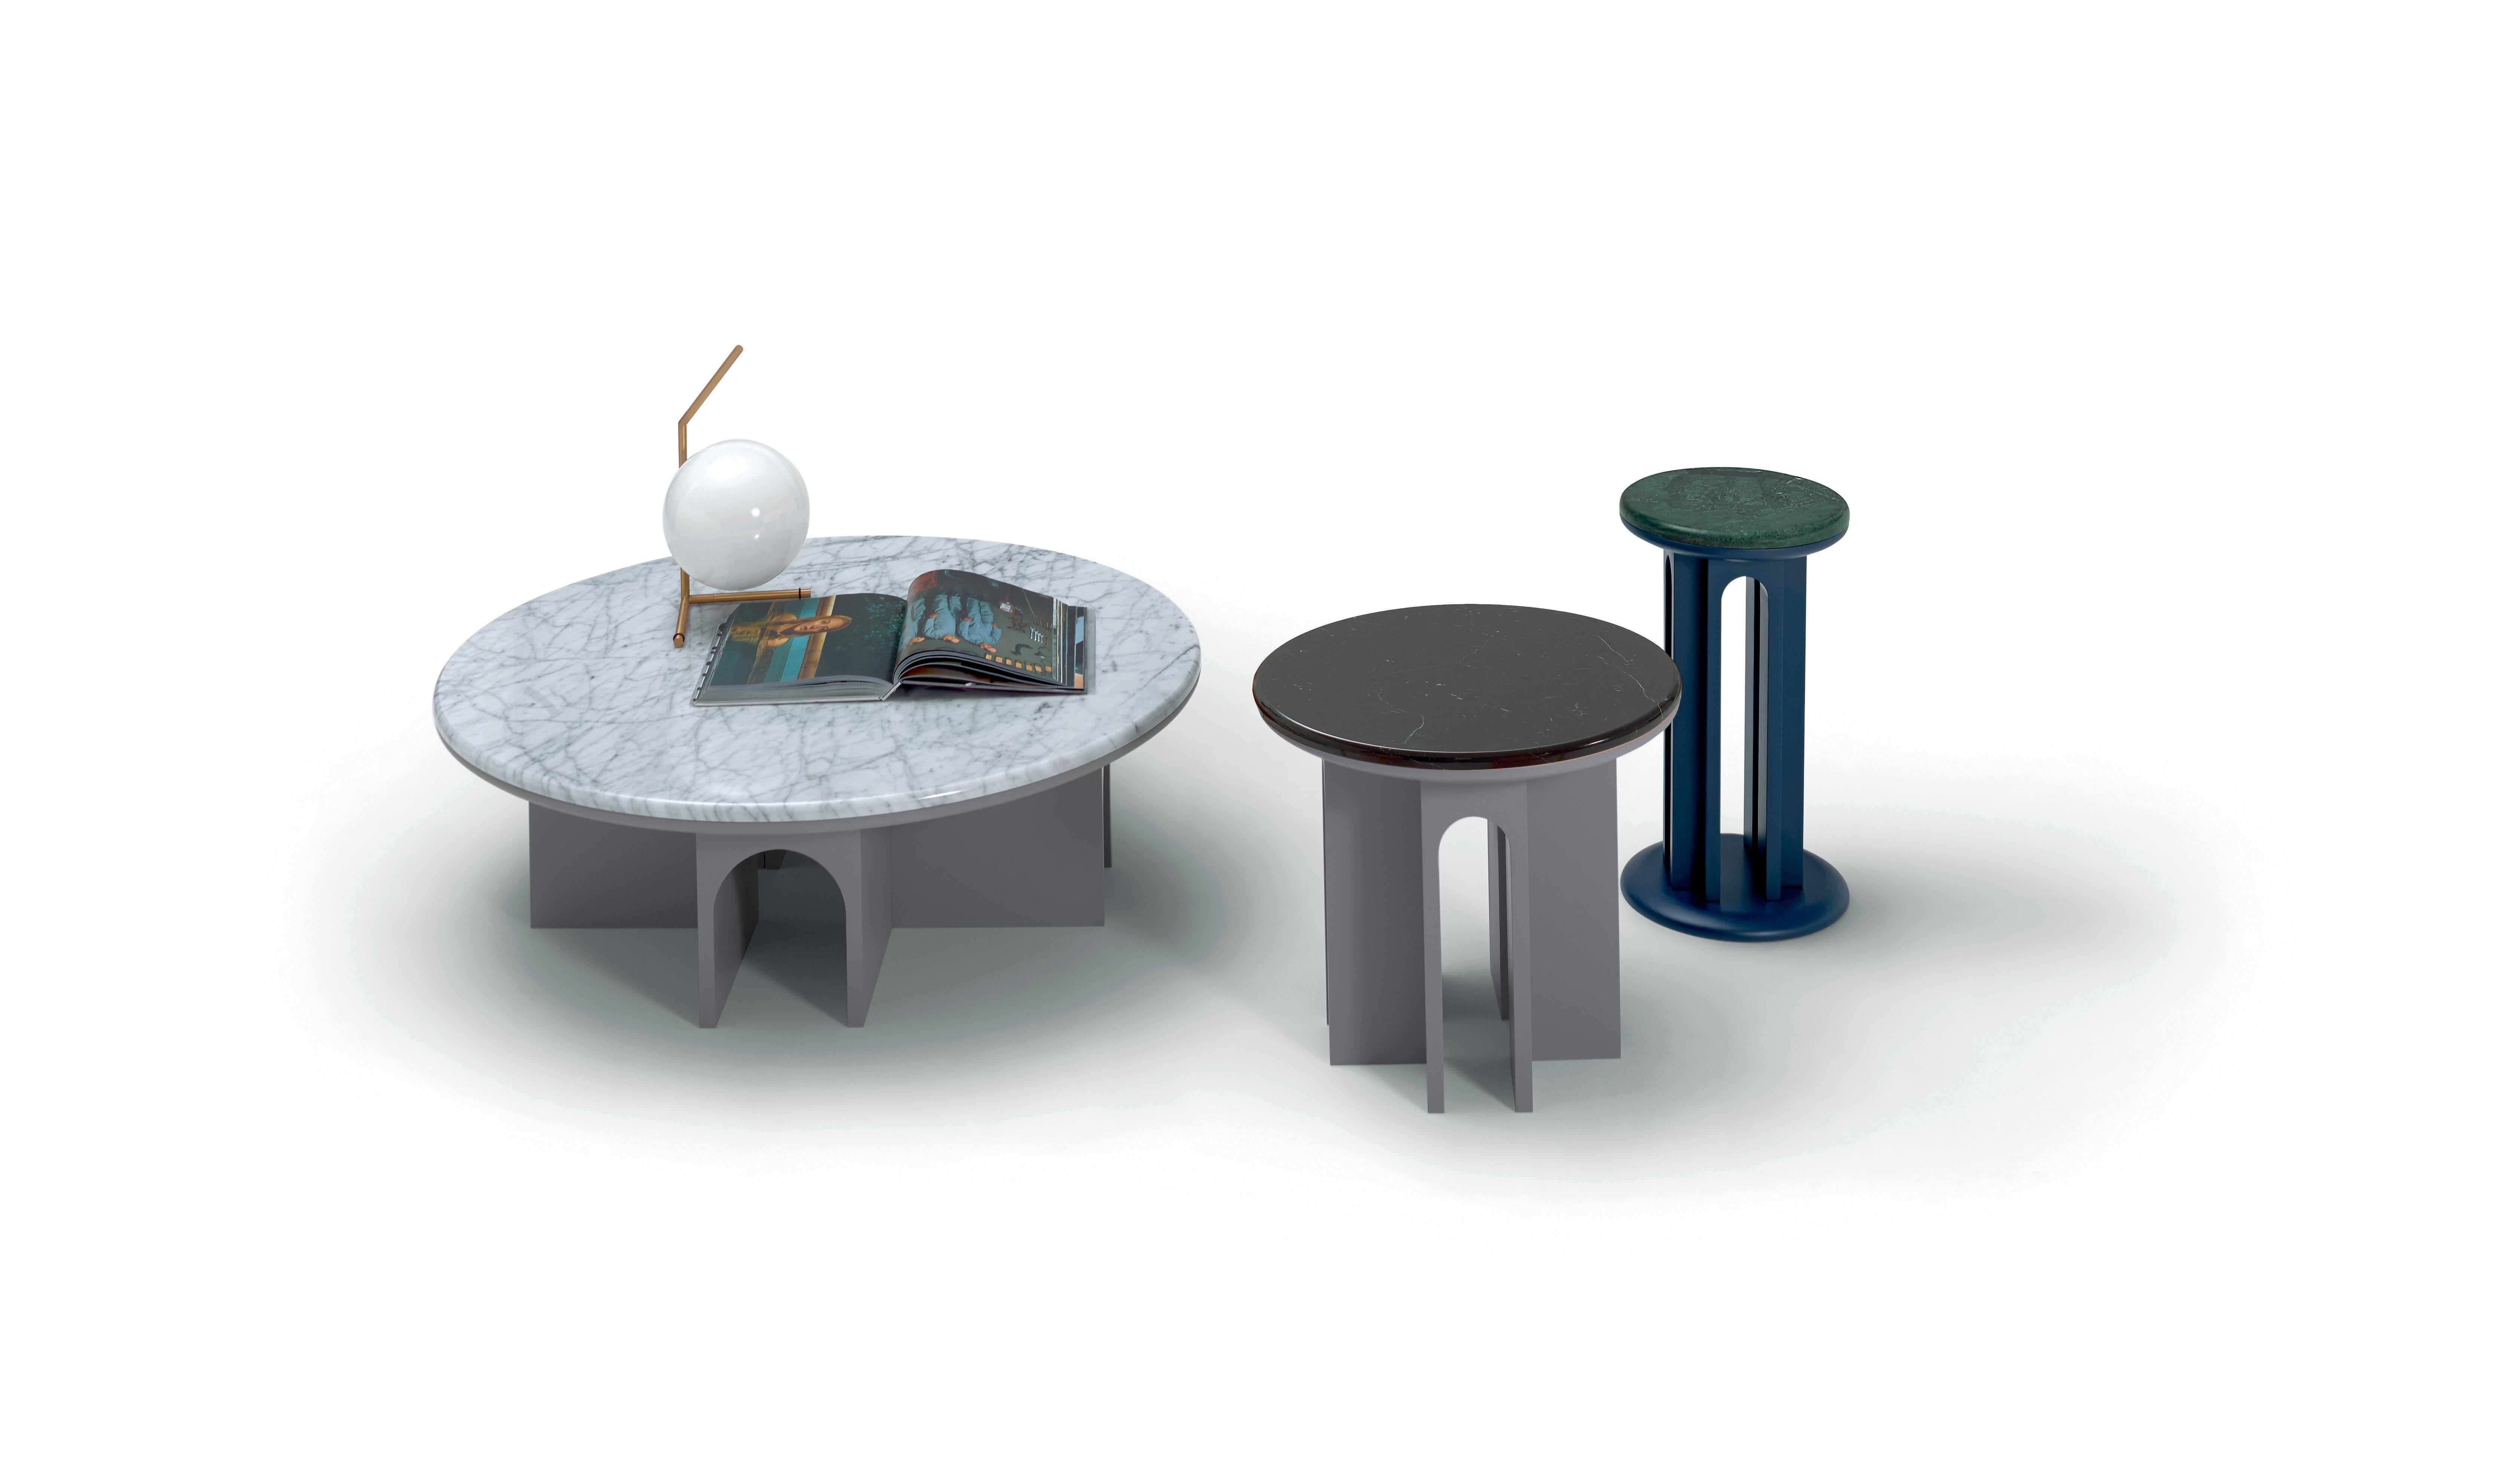 Arflex Arcolor 100 Small Table in Black Marquinia Marble Top by Jaime Hayon. Small tables designed around the classical geometry of the arch, employing from the beginning the disciplined use of the arch to create something more